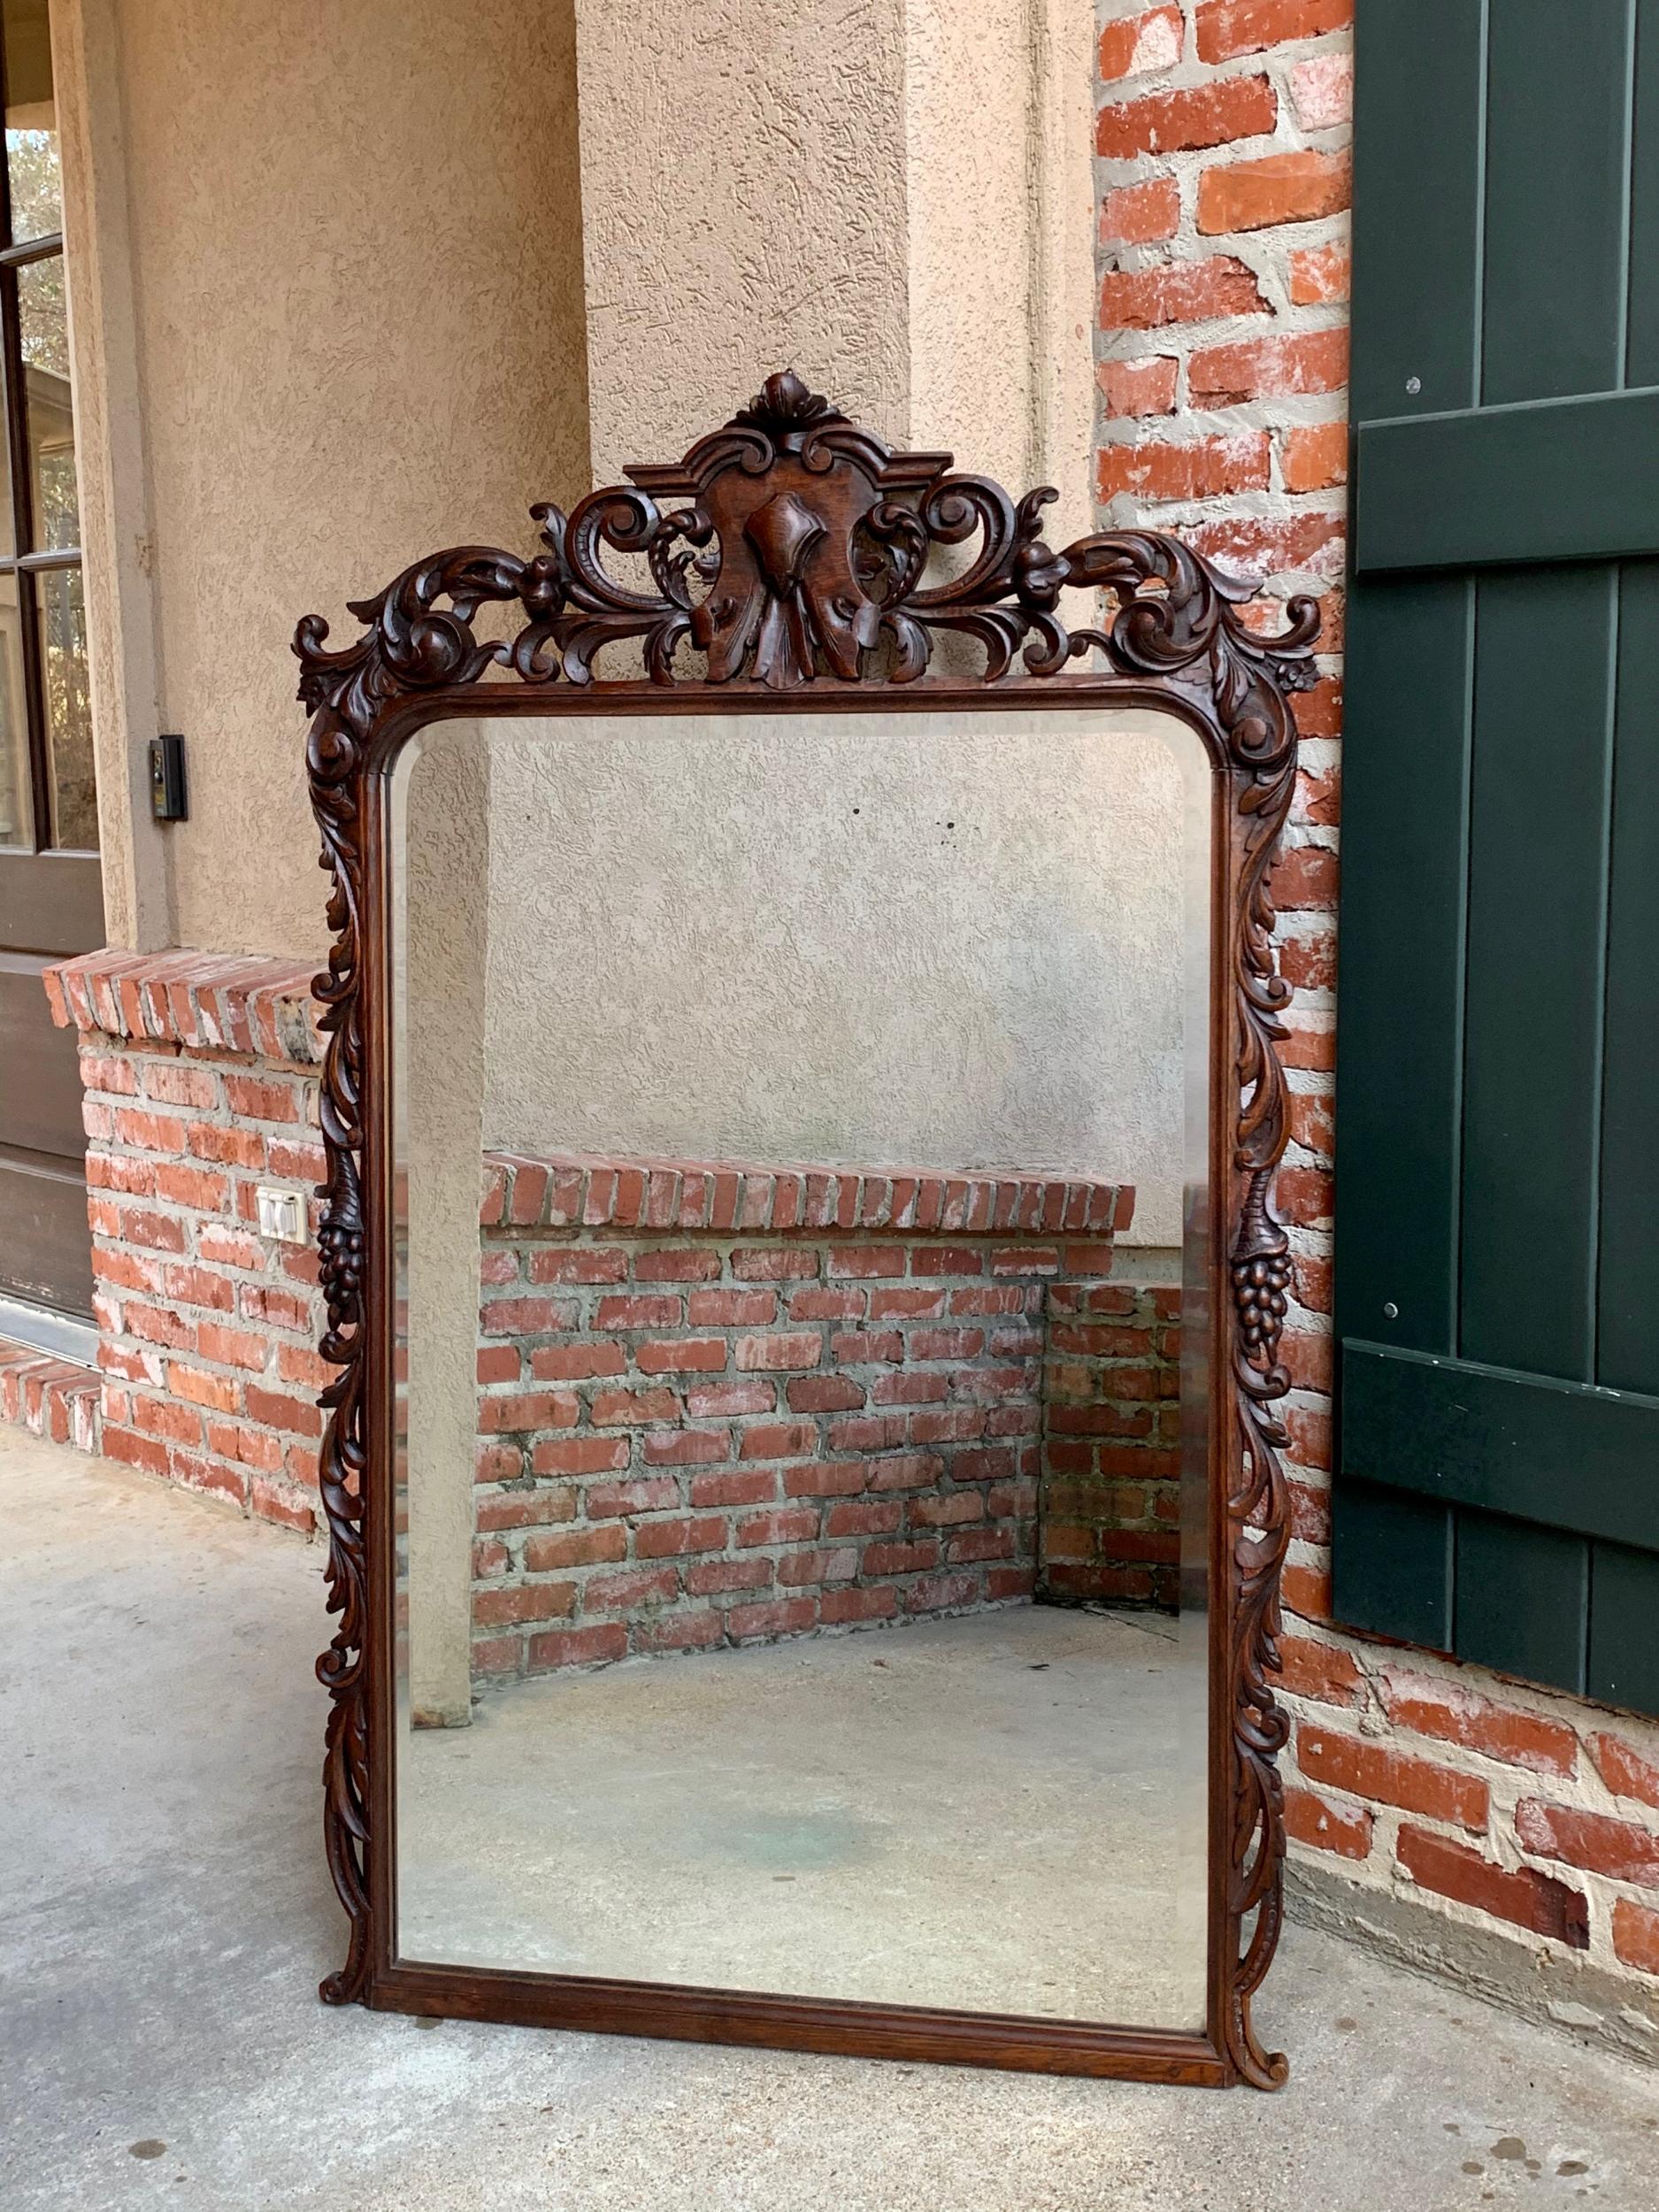 19th century antique French carved oak pier mantel mirror renaissance Louis XIV

~ Direct from France
~ A large and lovely antique French wall mirror, in full pier mirror size
~ Beautiful hand carved designs with amazing craftsmanship
~ Large upper